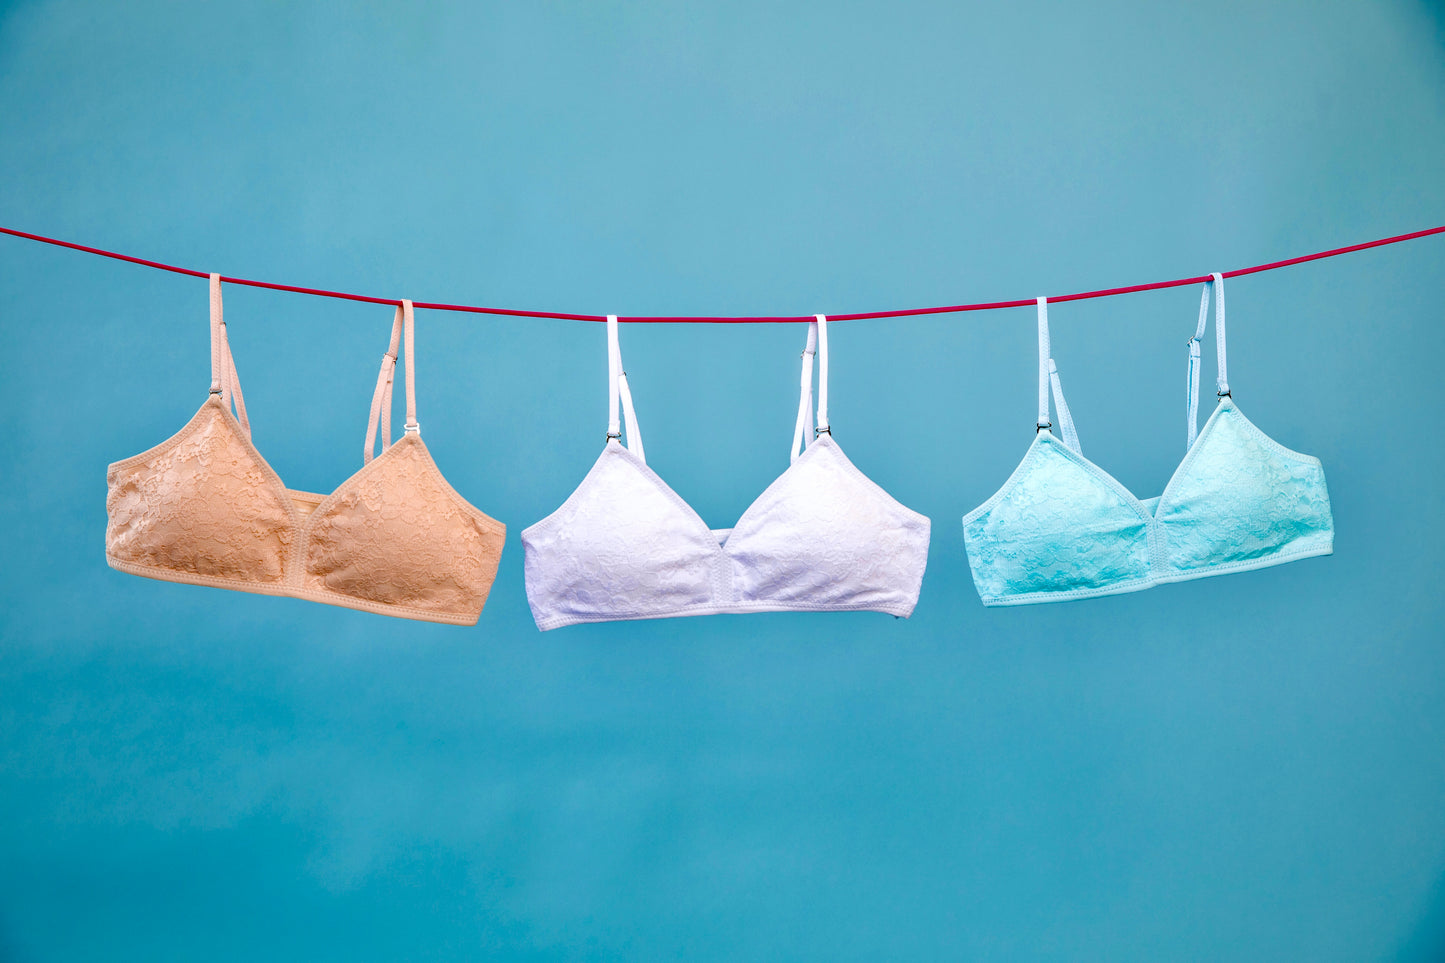 Her-Rah! 1st Bra on X: Always made with love.. 💜 Customize your 1st bra  with us at  . . . . . #Herrah1stBra #firstbra  #myfirstbra #herfirstbra #1stbra #my1stbra #her1stbra #girlpower #beyou #